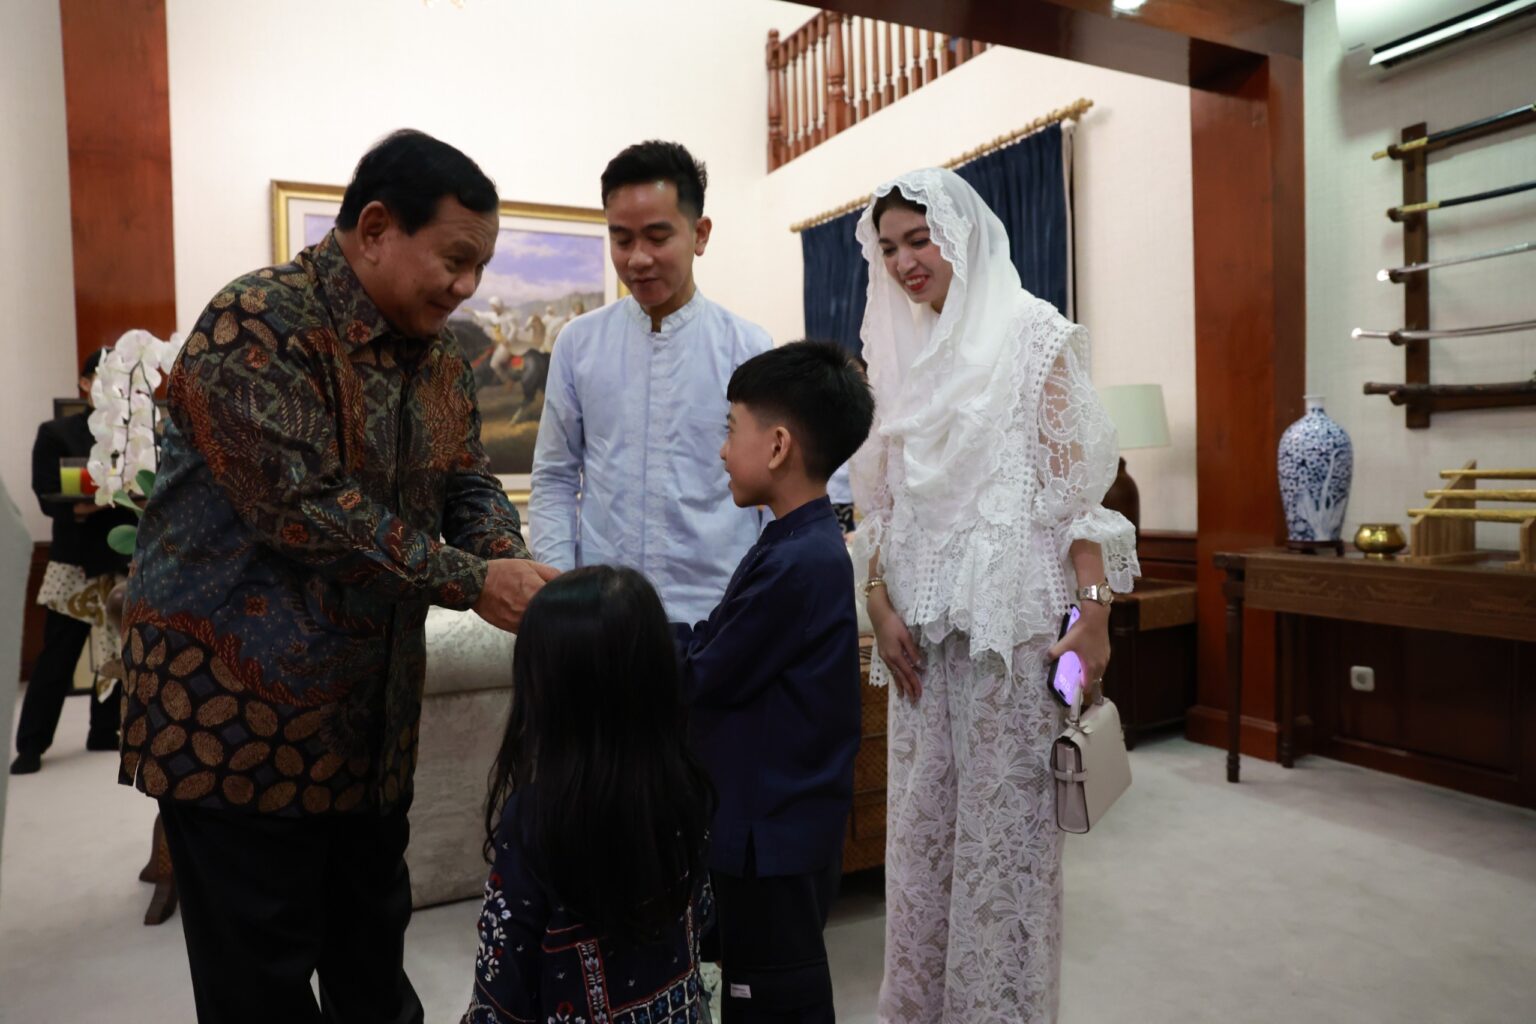 A Joyful Moment Full of Laughter with Prabowo Subianto and Gibran during the Family Gathering